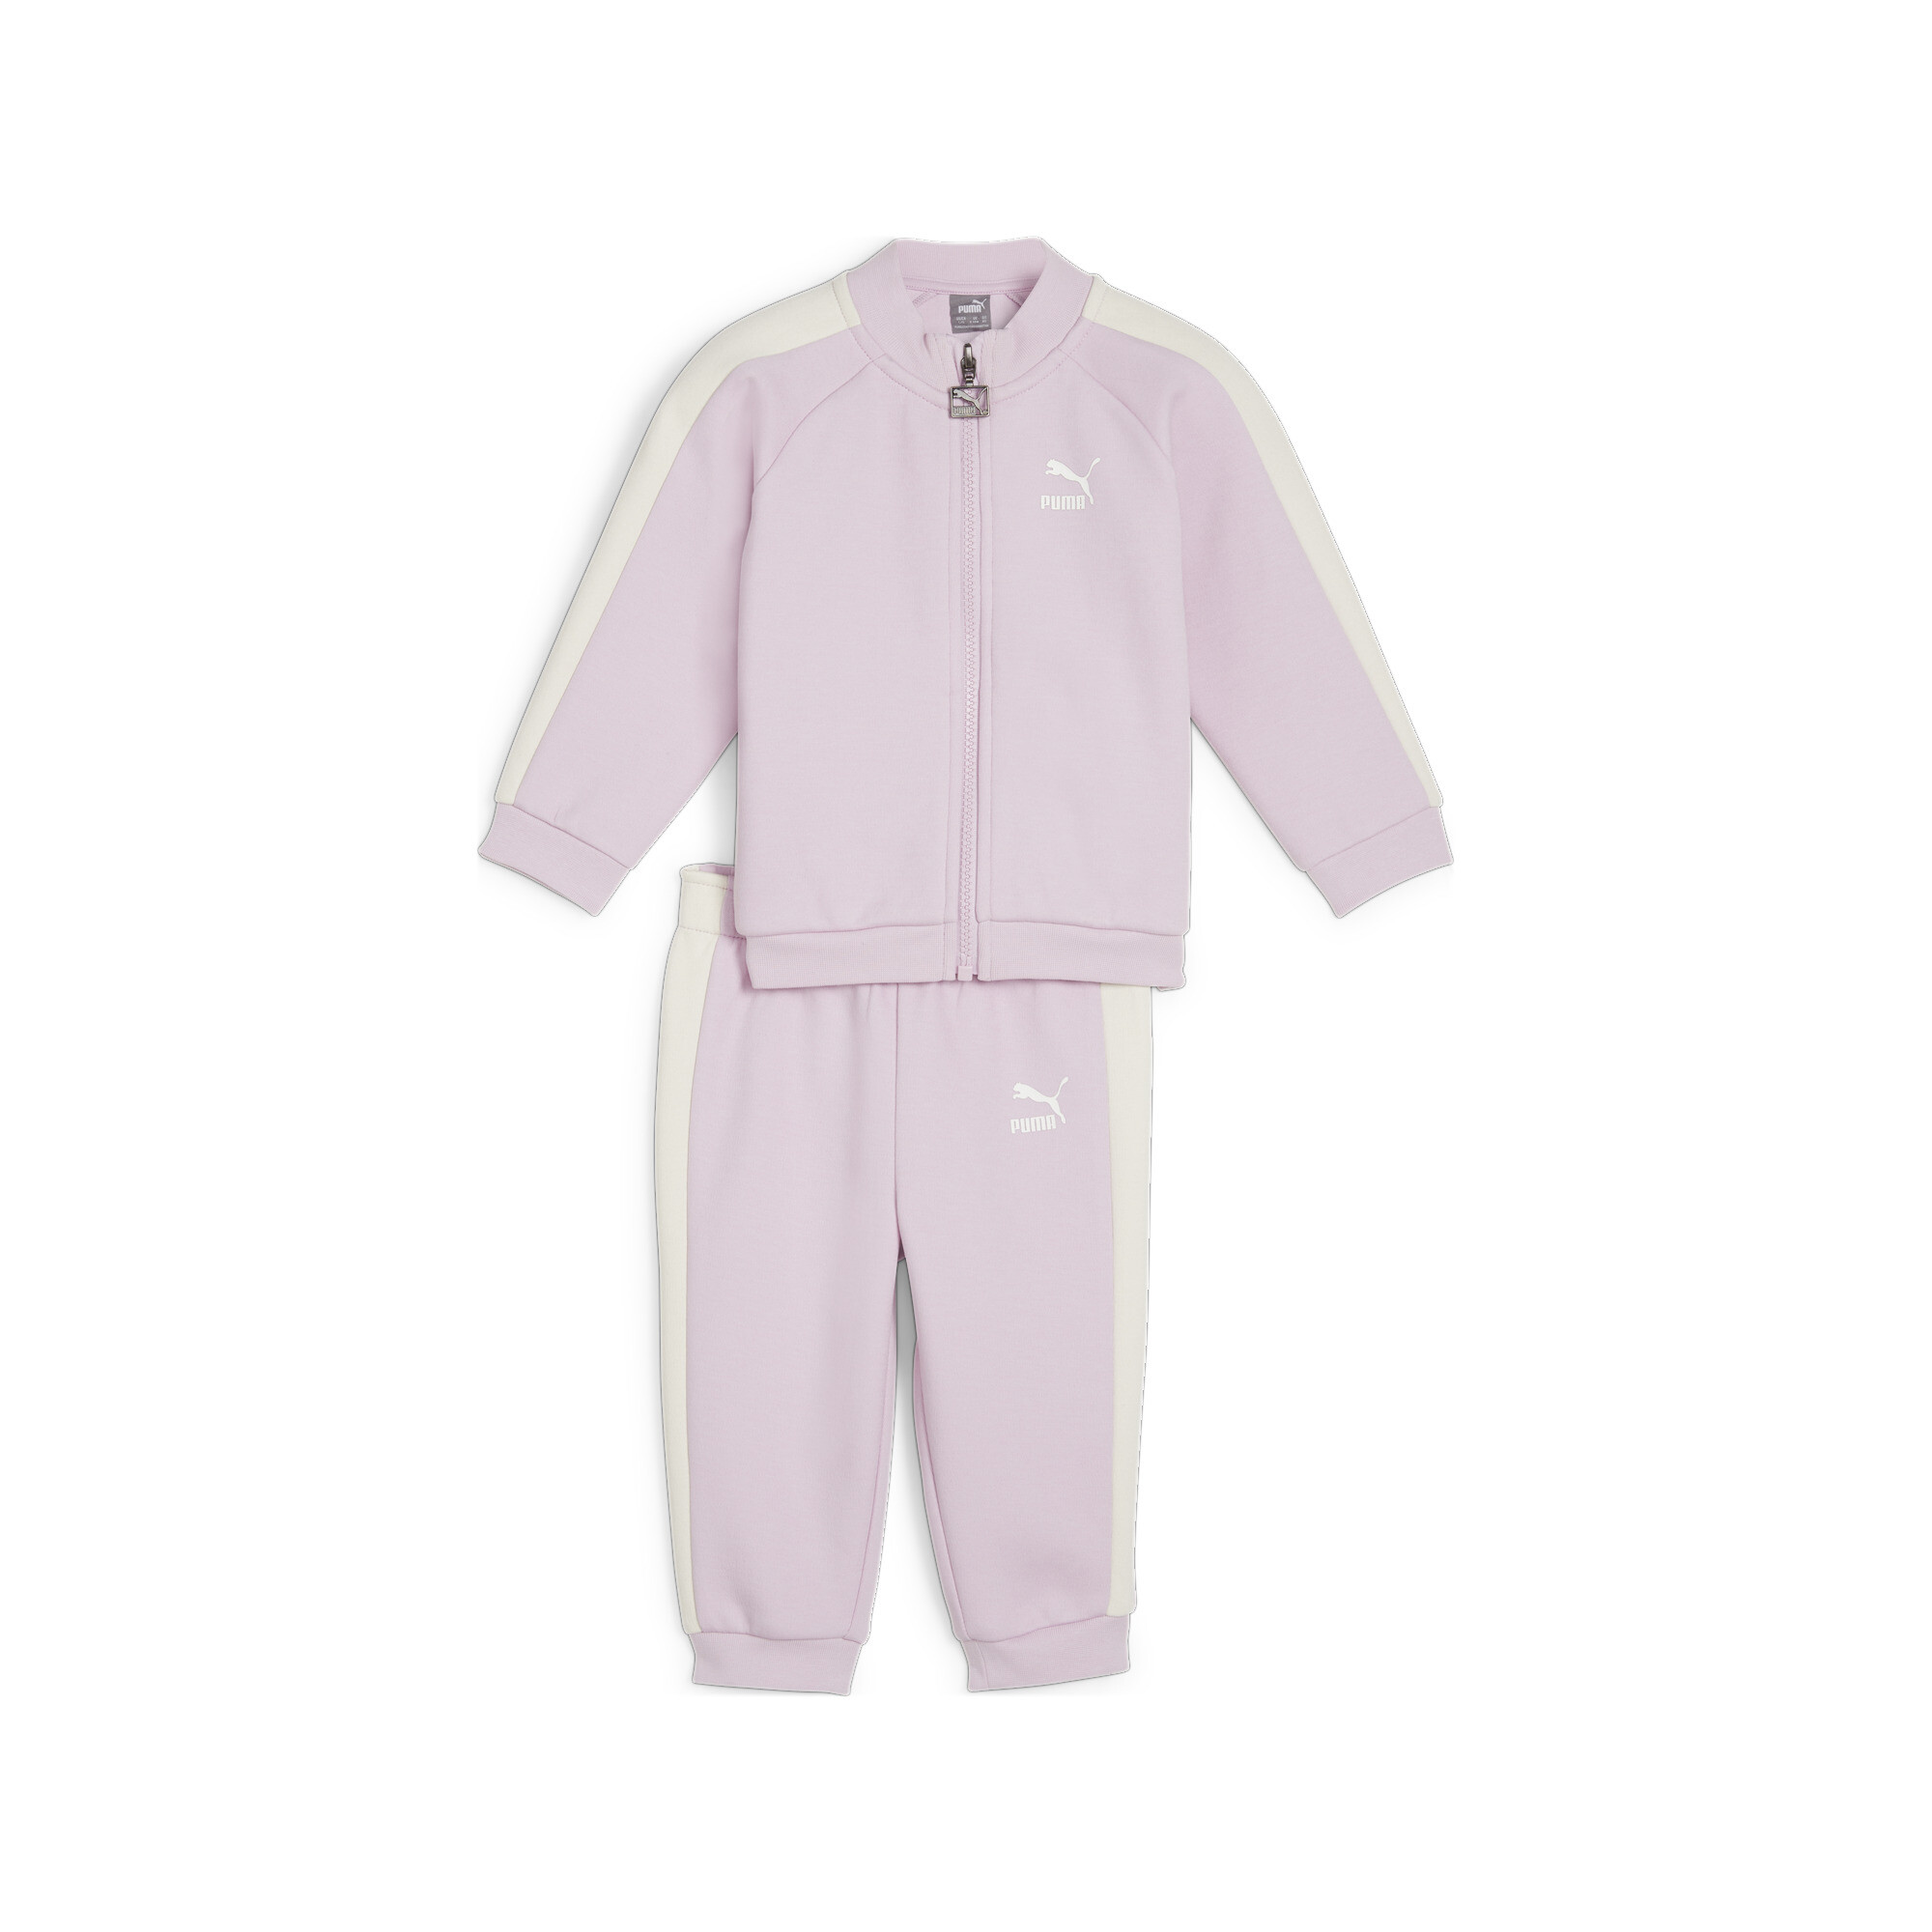 Kids' PUMA MINICATS T7 ICONIC Baby Tracksuit Set In 90 - Purple, Size 4-6 Months